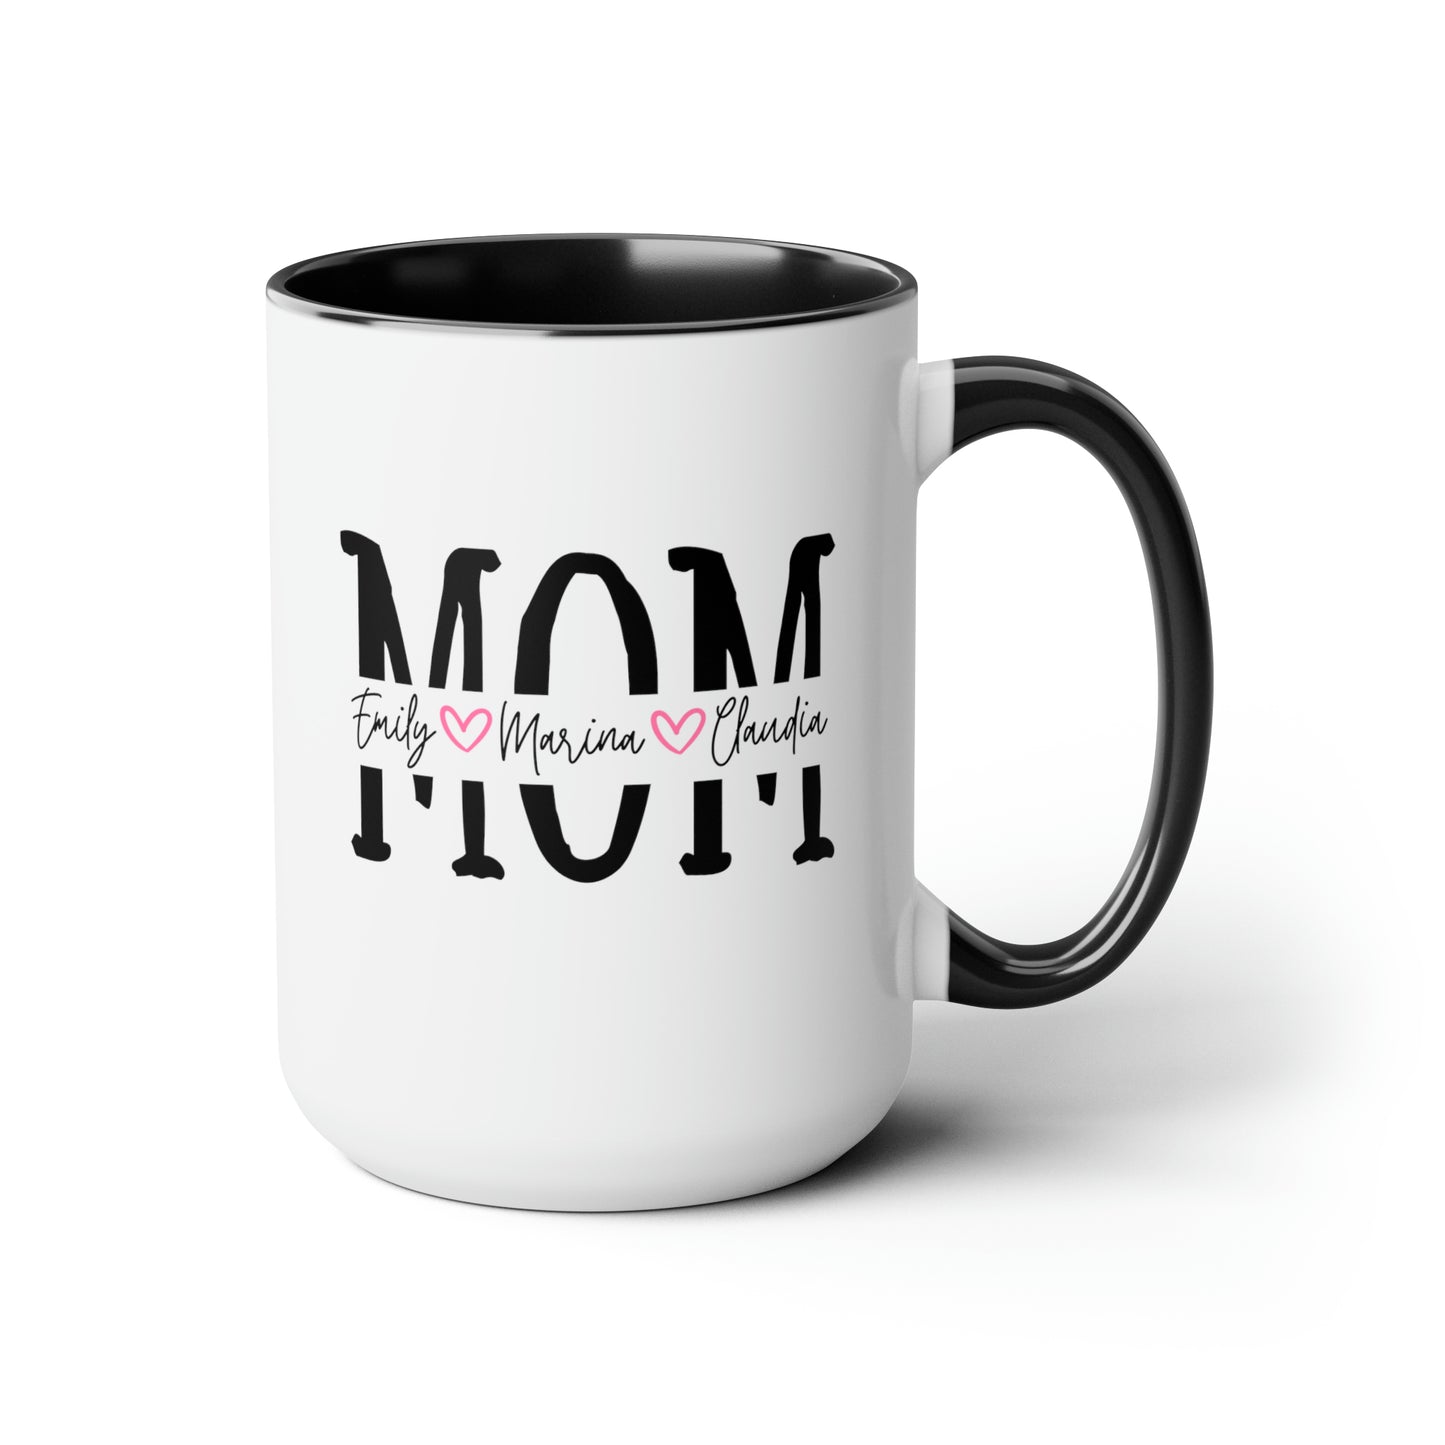 Mom With Kids' Names 15oz white with black accent funny large coffee mug gift for mother's day son daughter heart personalize custom waveywares wavey wares wavywares wavy wares